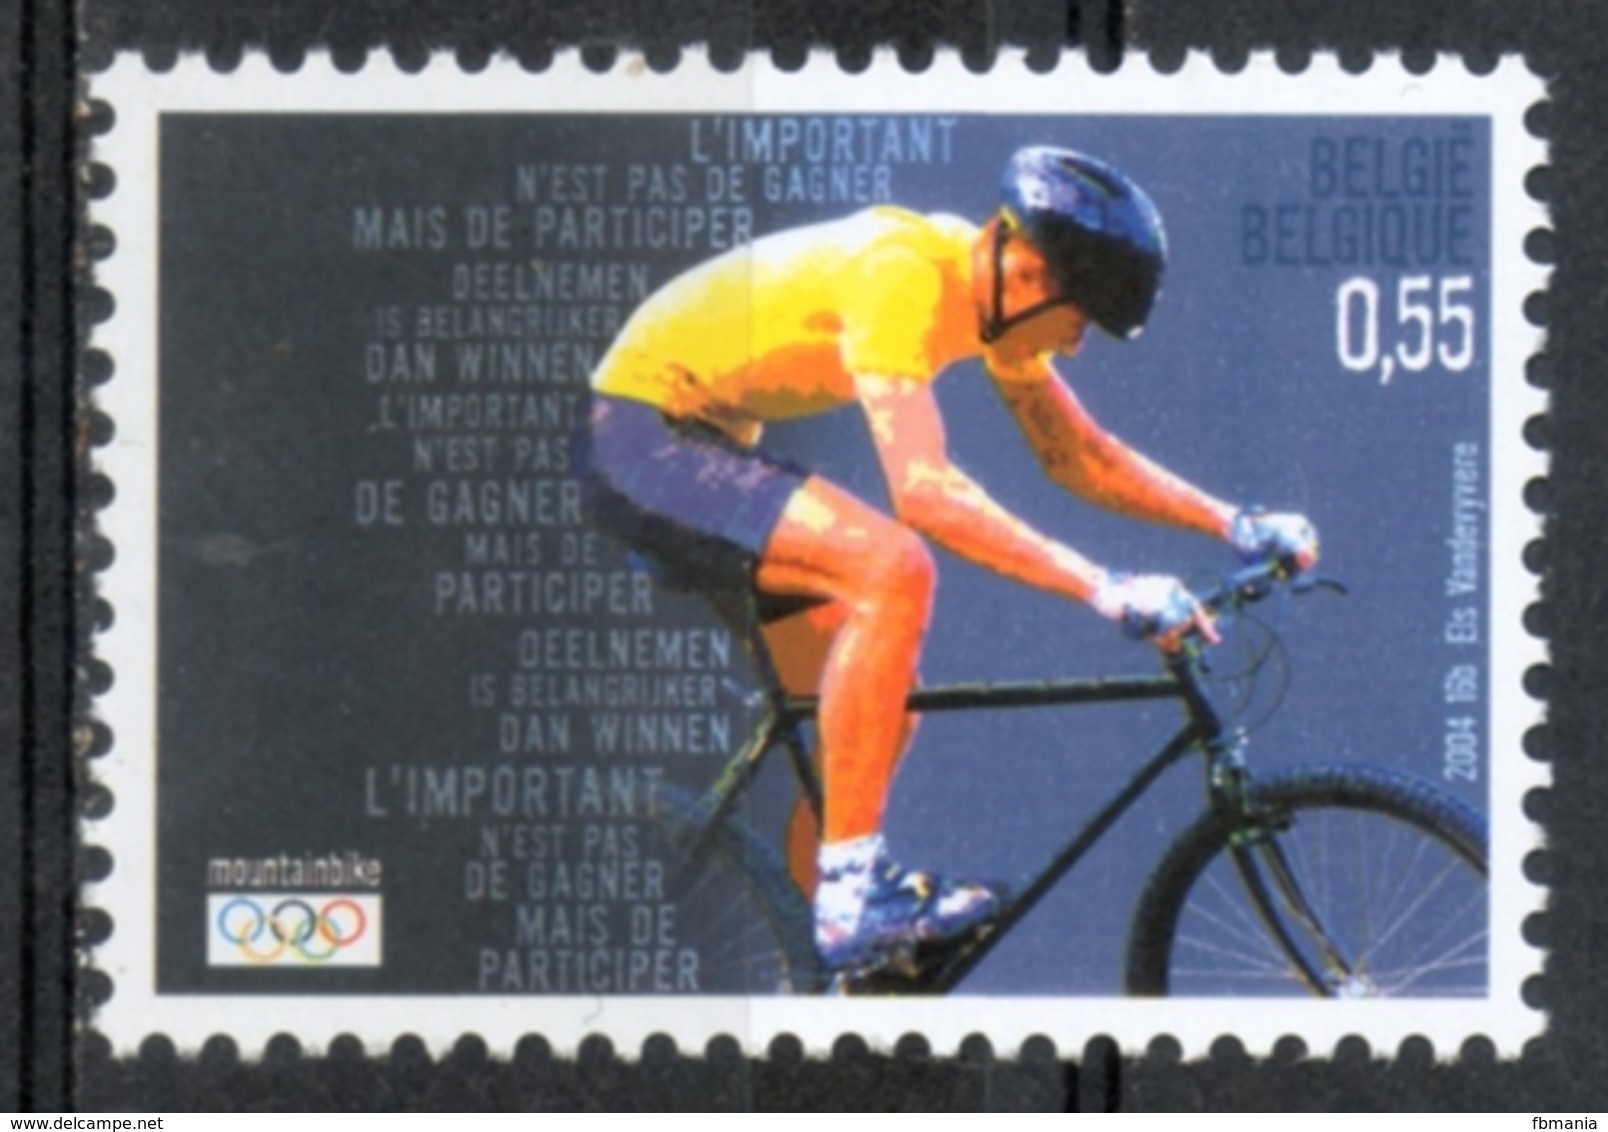 Belgio Belgium 2004 - Giochi Olimpici Atene Olympic Games Athens Ciclismo Cycling  MNH ** - Ciclismo